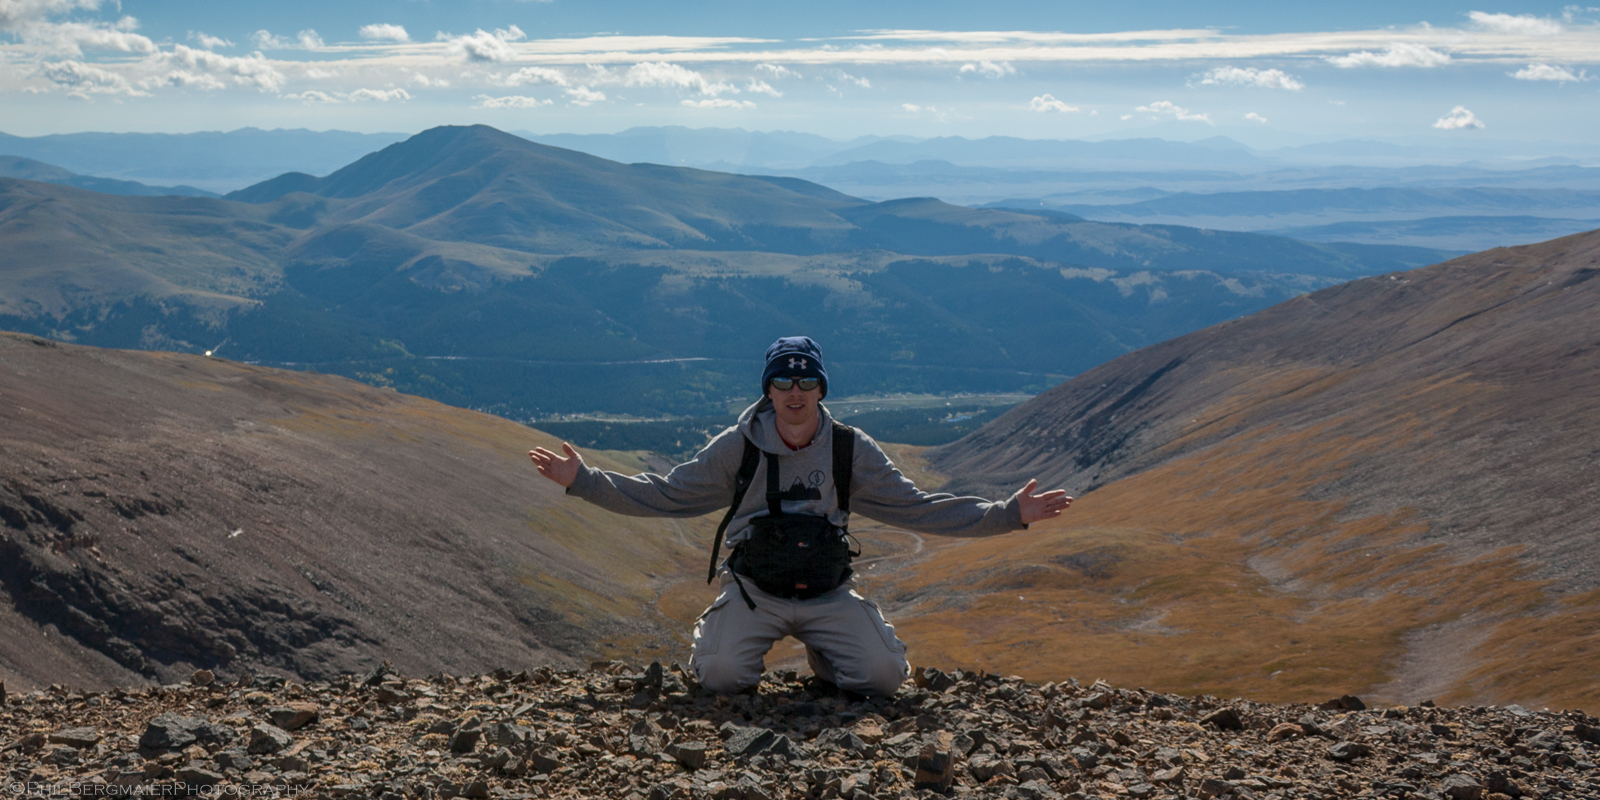 Photo 10 - Taking it easy on the summit of Mt. Cameron